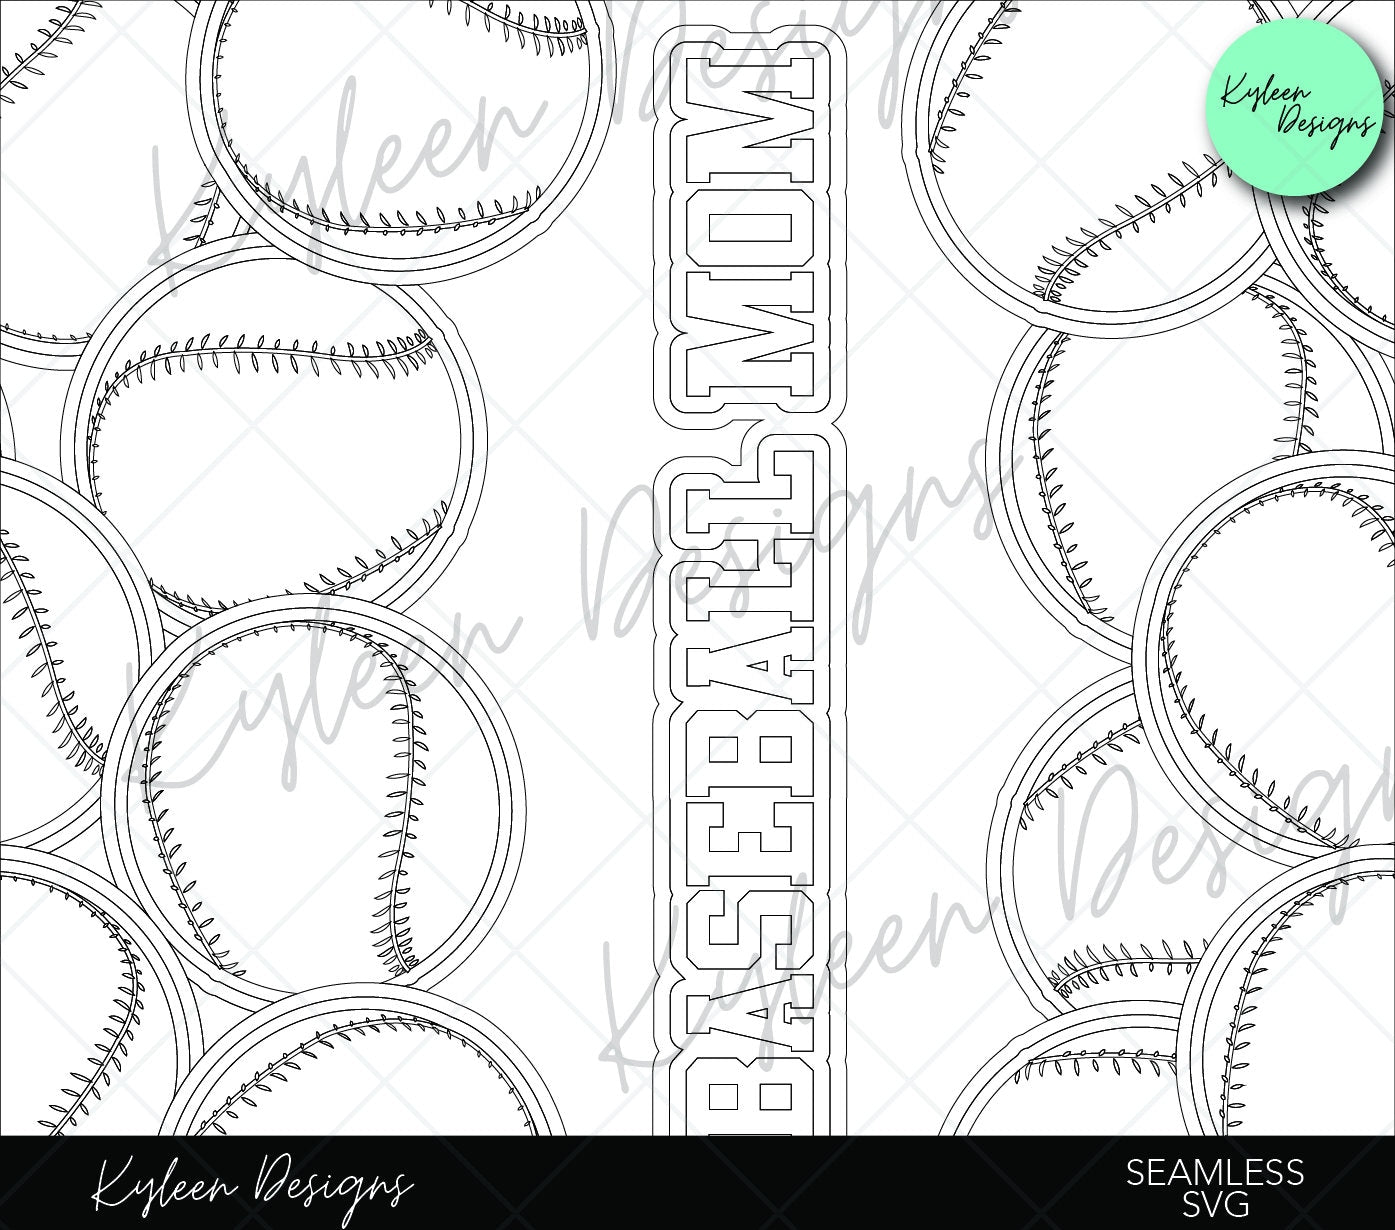 20 ounce STRAIGHT seamless baseball mom burst SVG PNG file stencil template